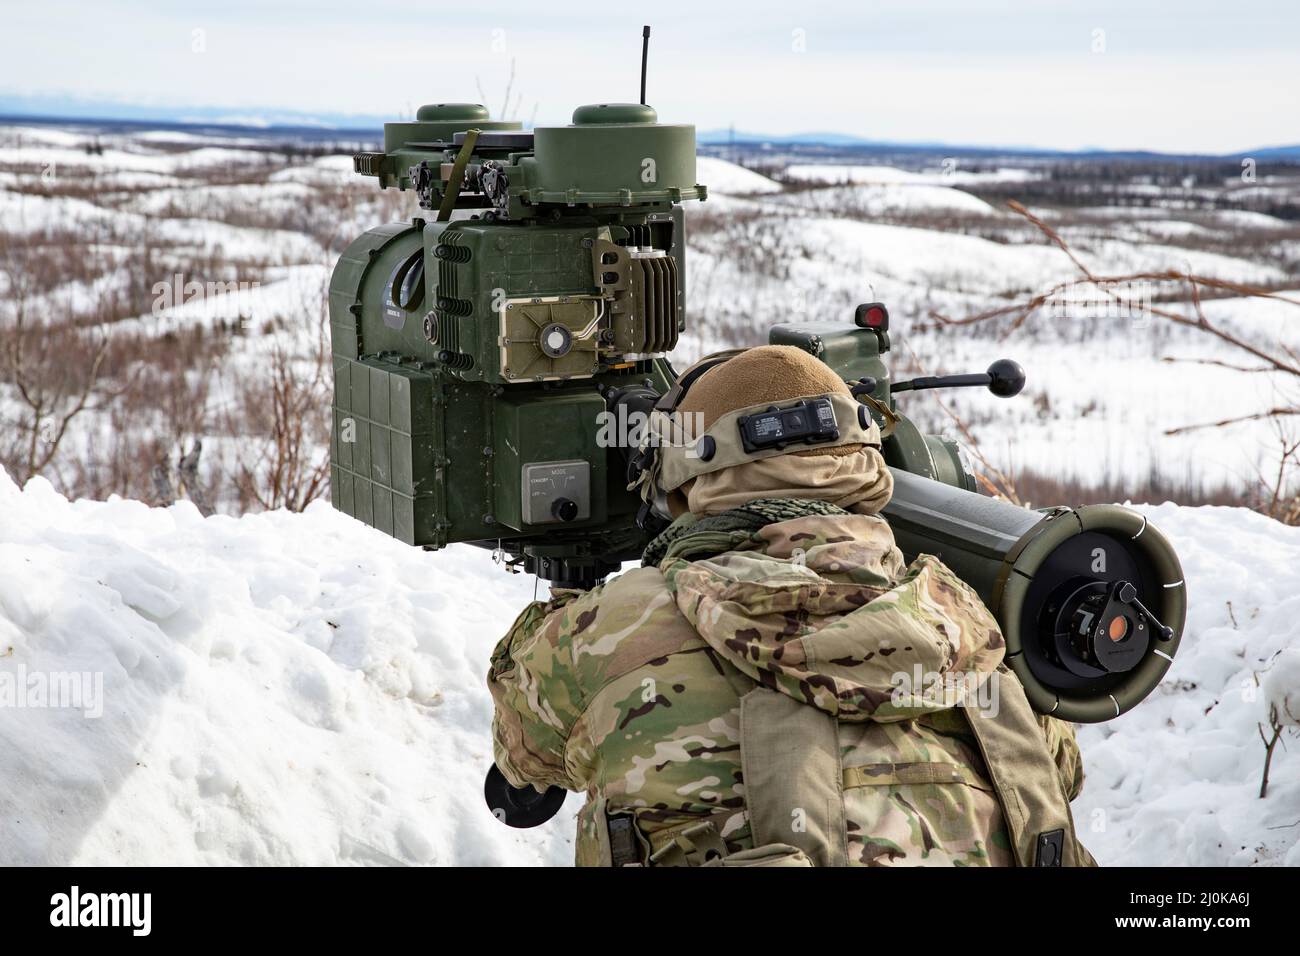 Fort Greely, United States. 18th Mar, 2022. U.S. Army paratrooper Spc. Brody Foreman, with Spartan Brigade, surveys the arctic landscape with an Improved Target Acquisition System before firing the TOW anti-tank missile during exercise Joint Pacific Multinational Readiness Center 22-02, March 18, 2022 in Fort Greely, Alaska. Credit: Sgt. Seth LaCount/U.S. Army/Alamy Live News Stock Photo